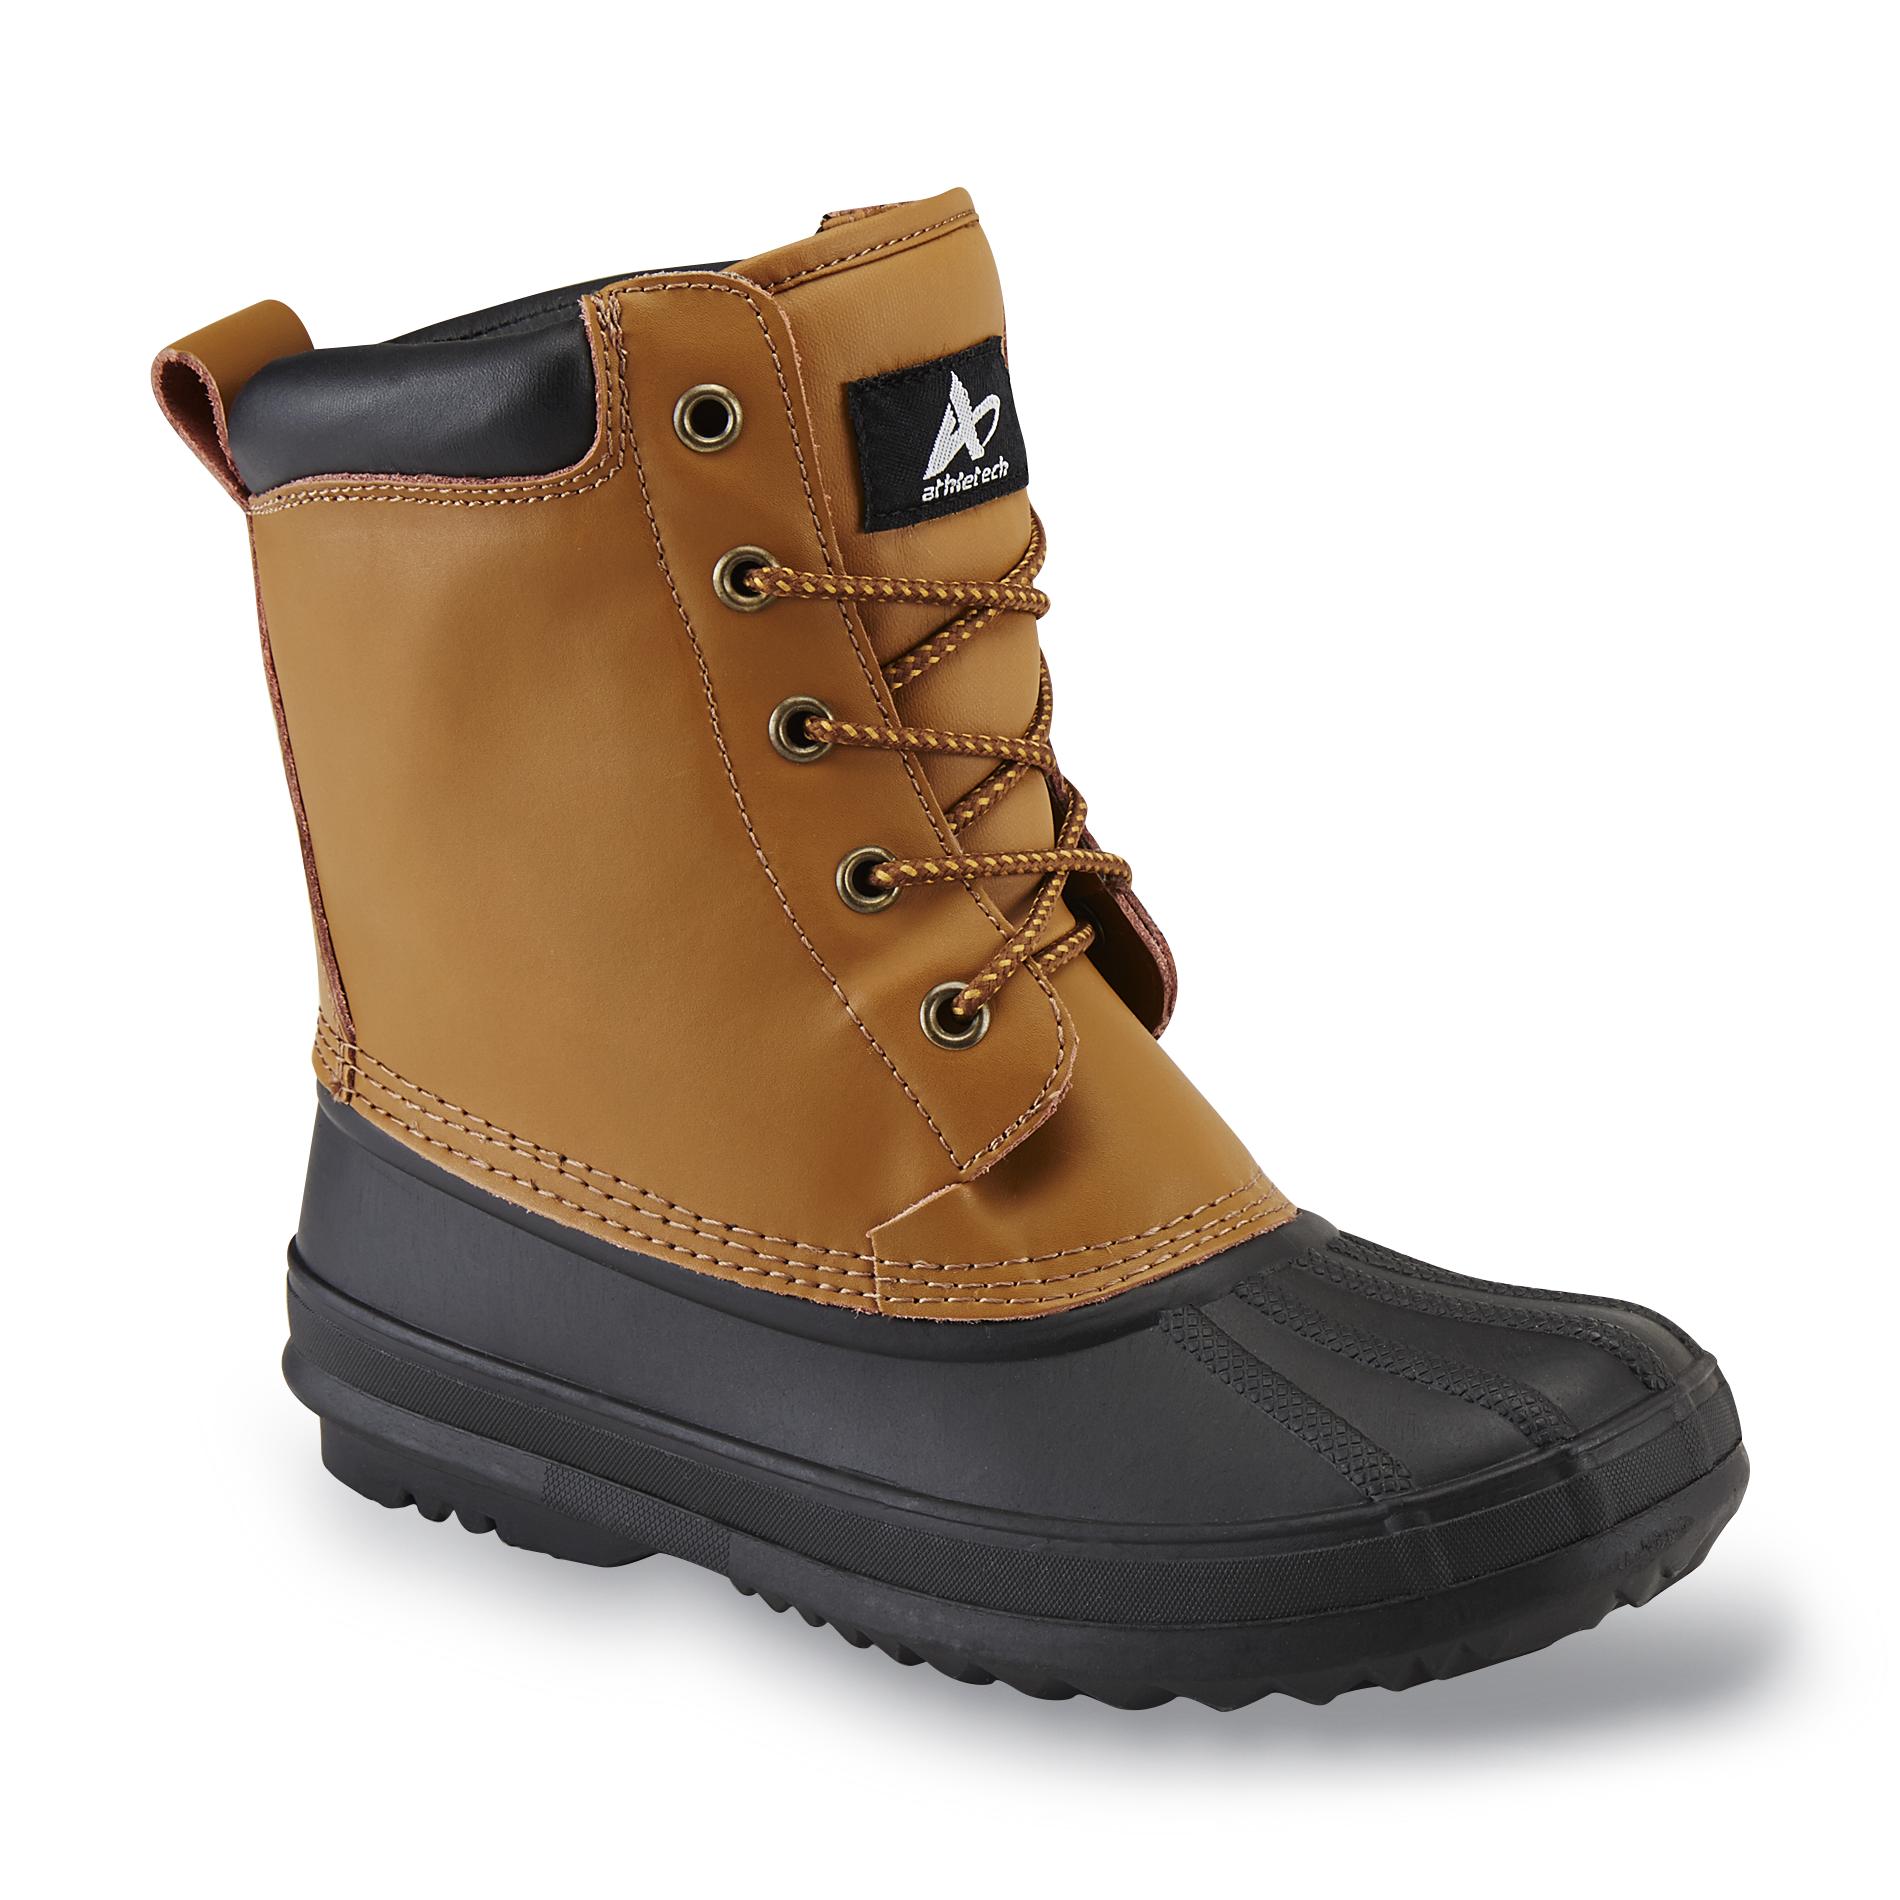 Athletech Women's Acacia Brown Water-Resistant Duck Boot